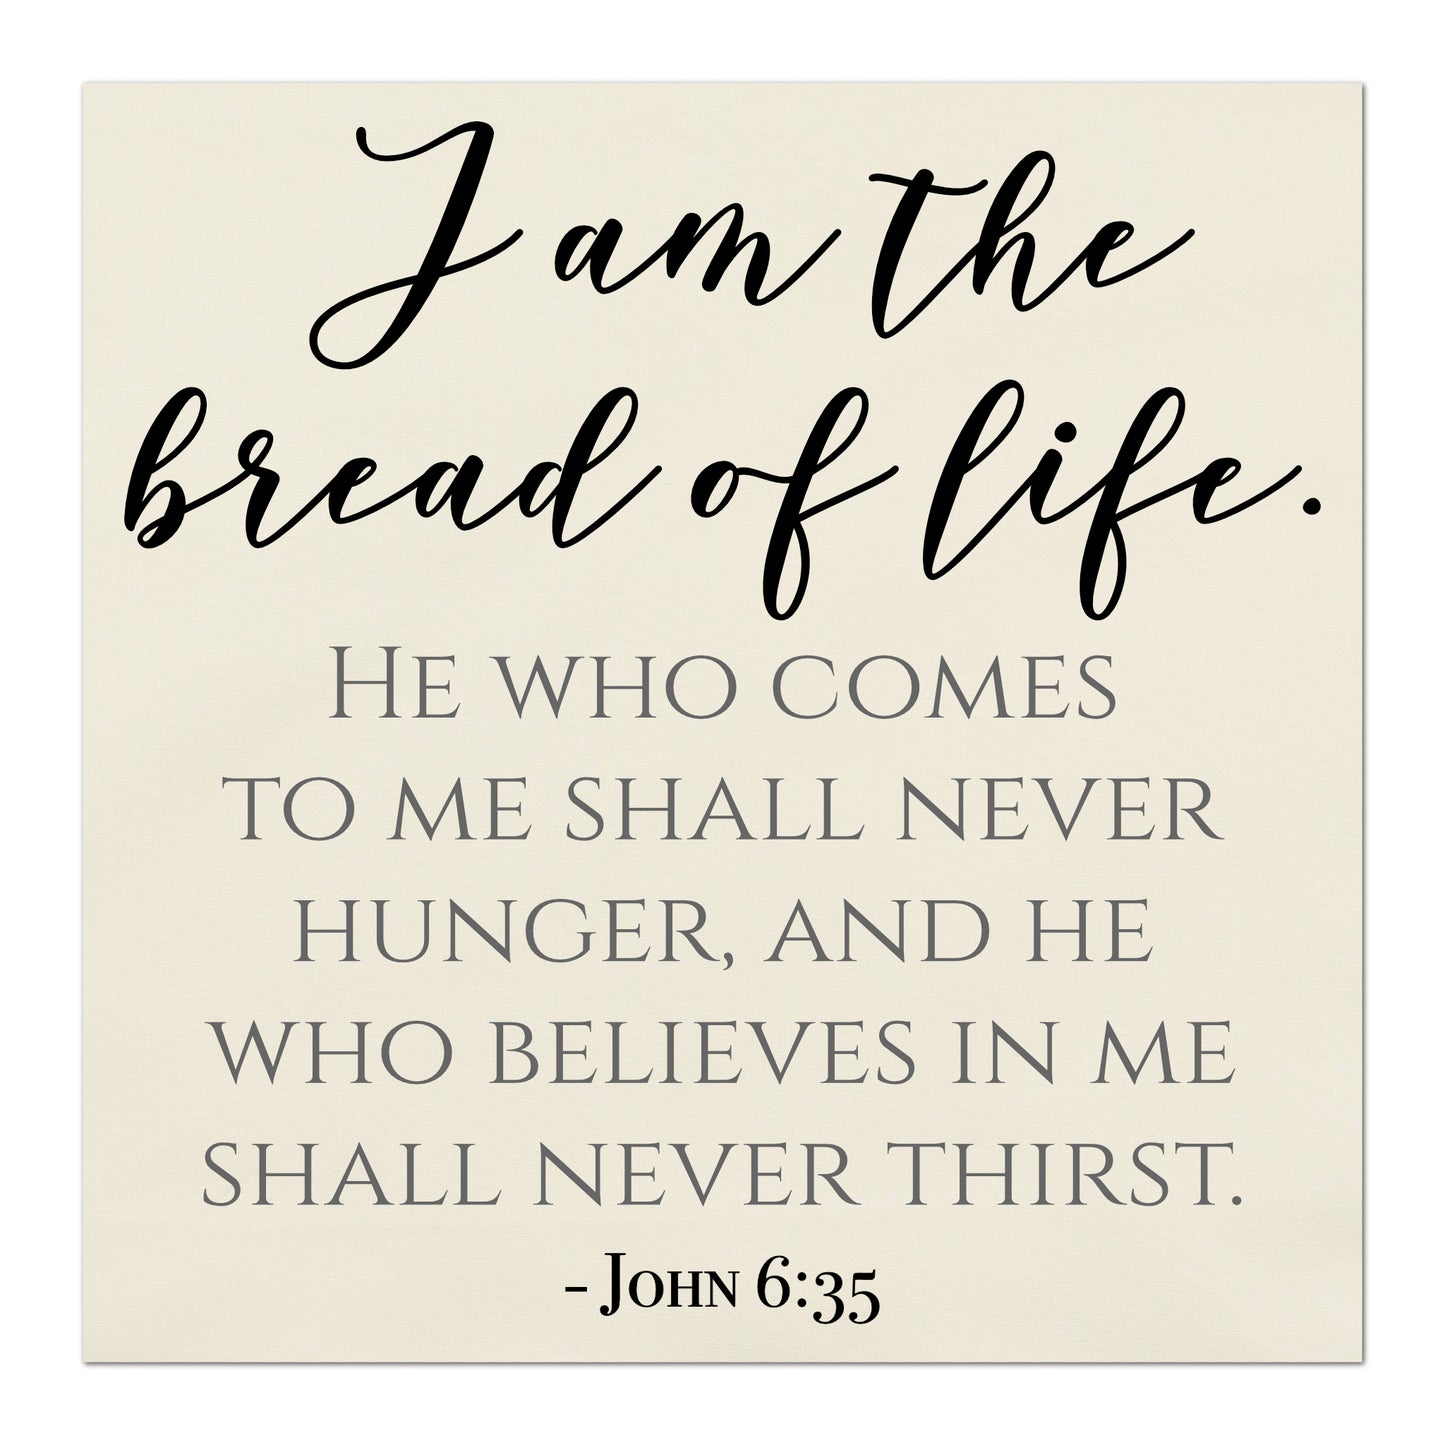 I am the bread of life.  He who come to me shall never hunger, and he who believes in me shall never thirst. - John 6:35, Fabric Panel Print, Quilt Block, Wall Hanging, Sewing Craft